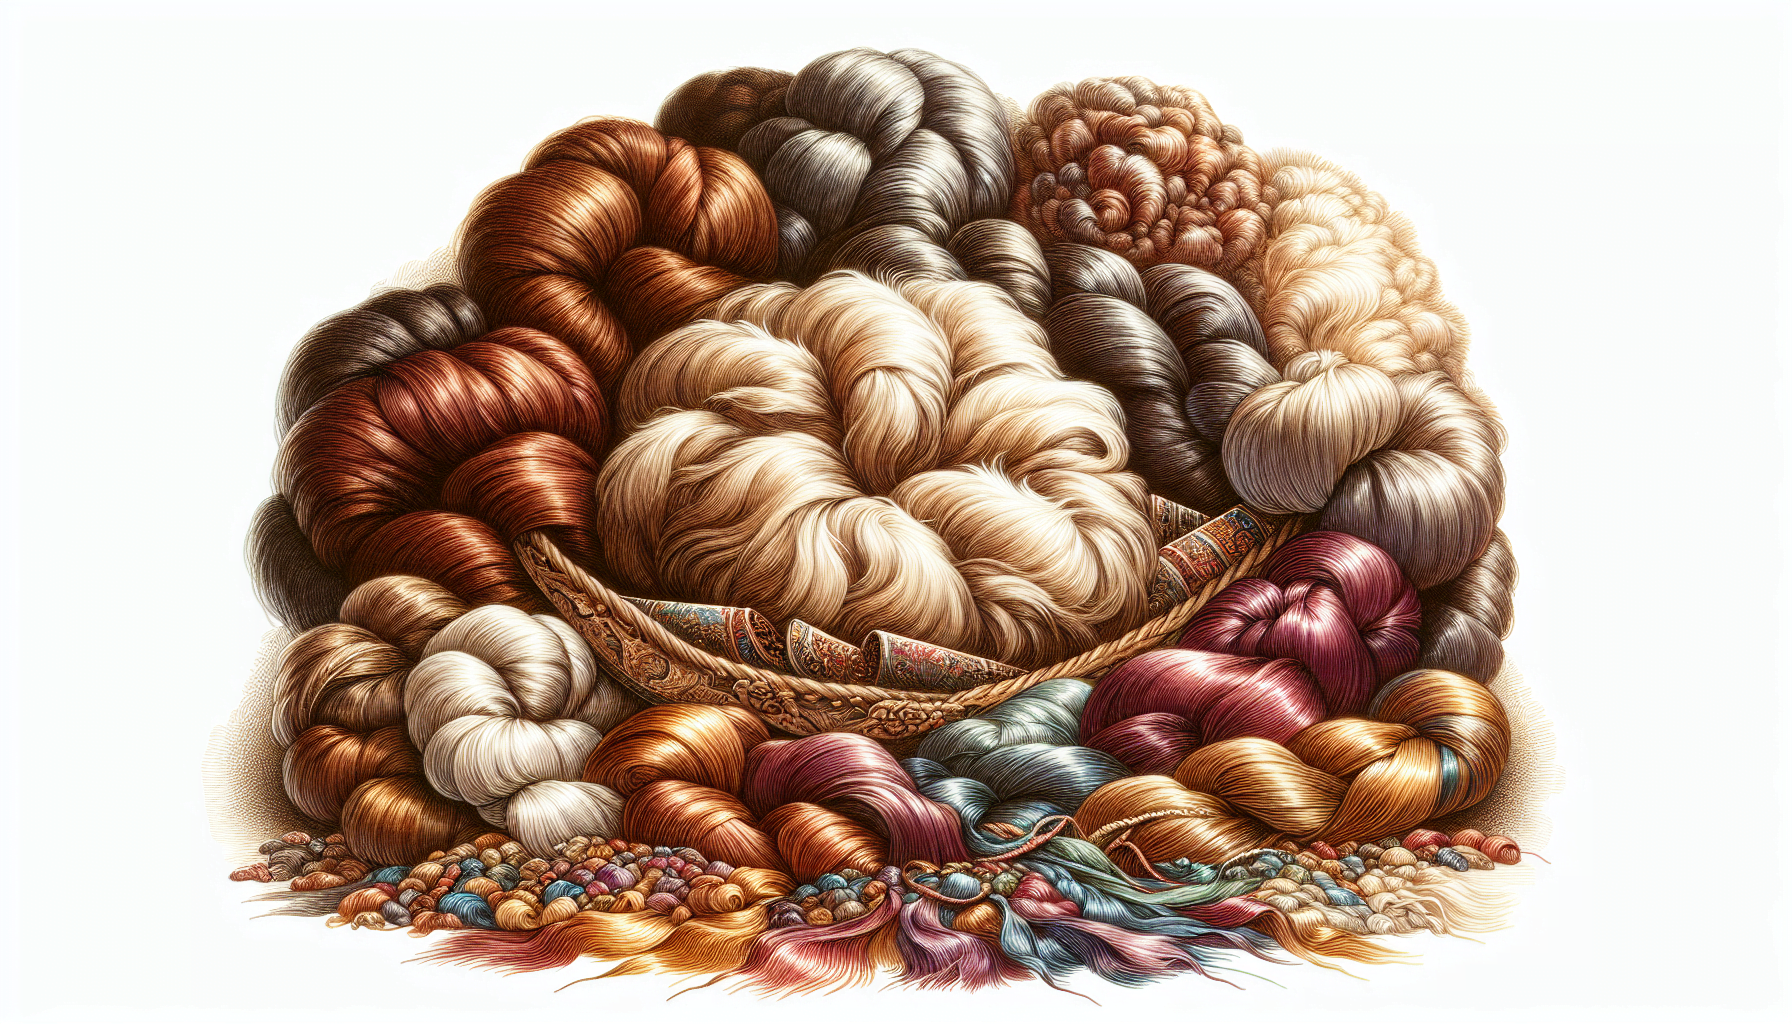 Illustration of high-quality wool and silk, the primary materials used in Persian rugs